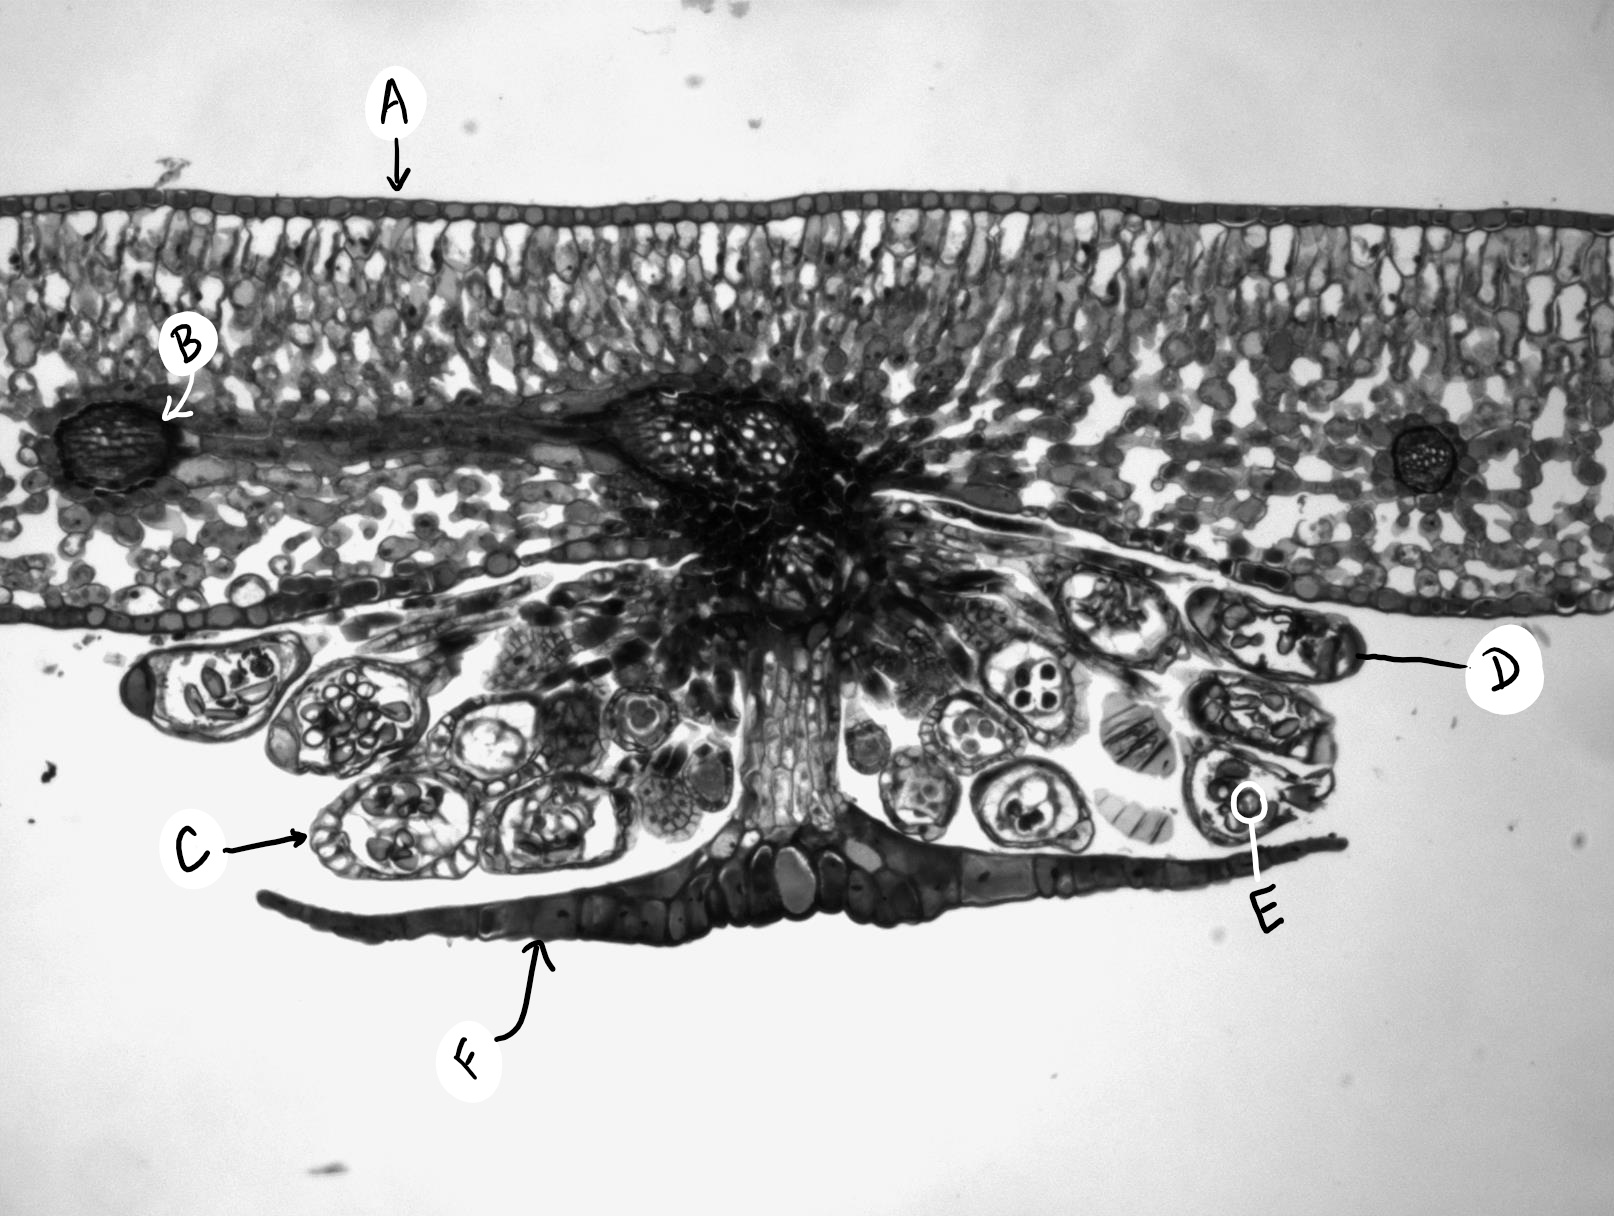 A labeled cross section through a fern sorus with an indusium